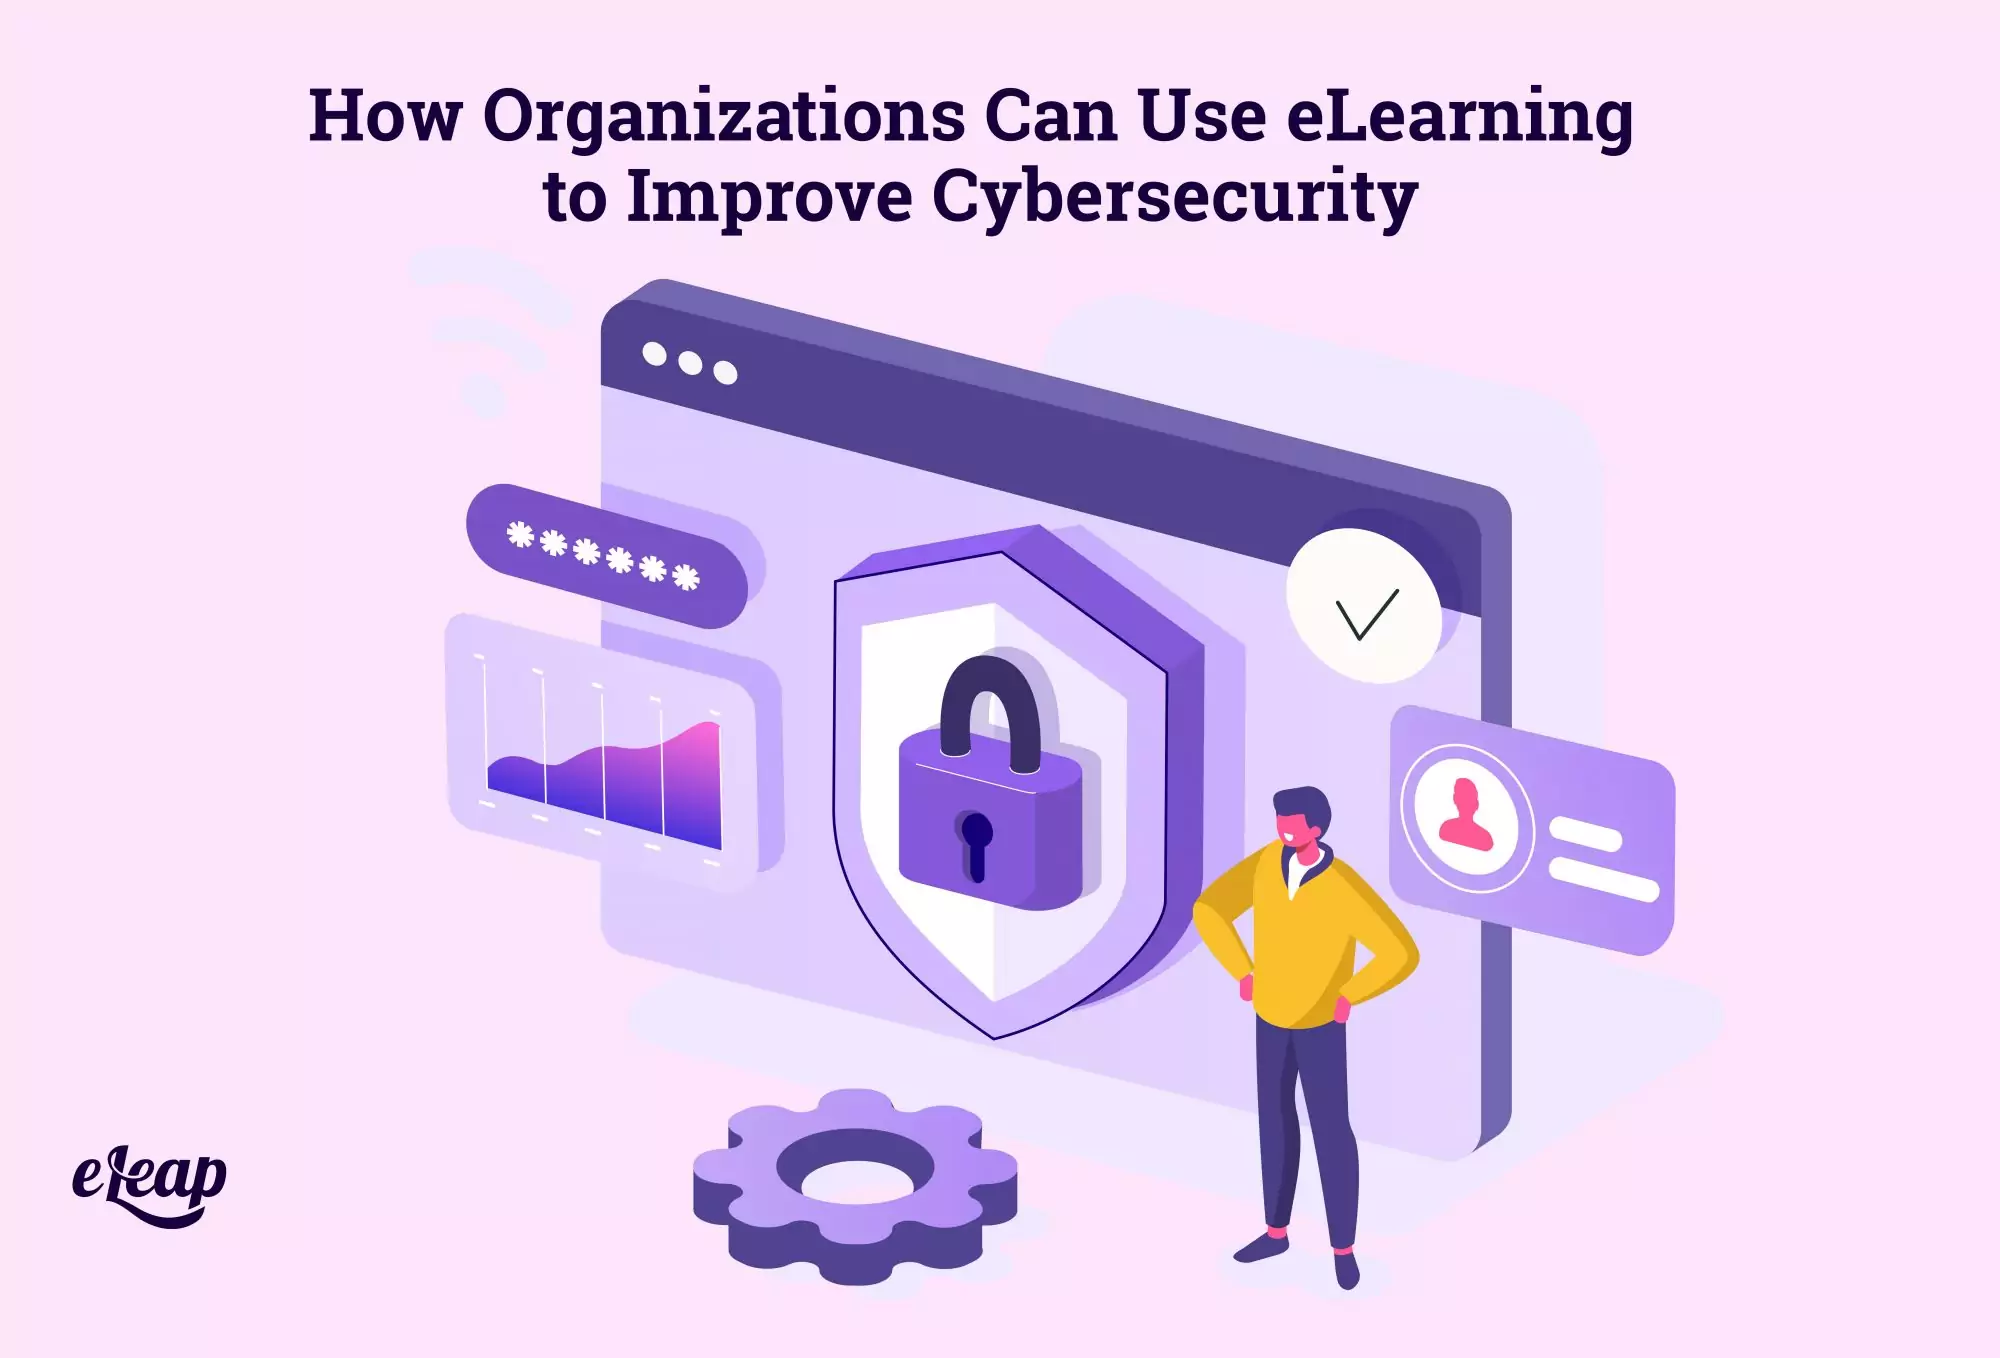 How Organizations Can Use eLearning to Improve Cybersecurity